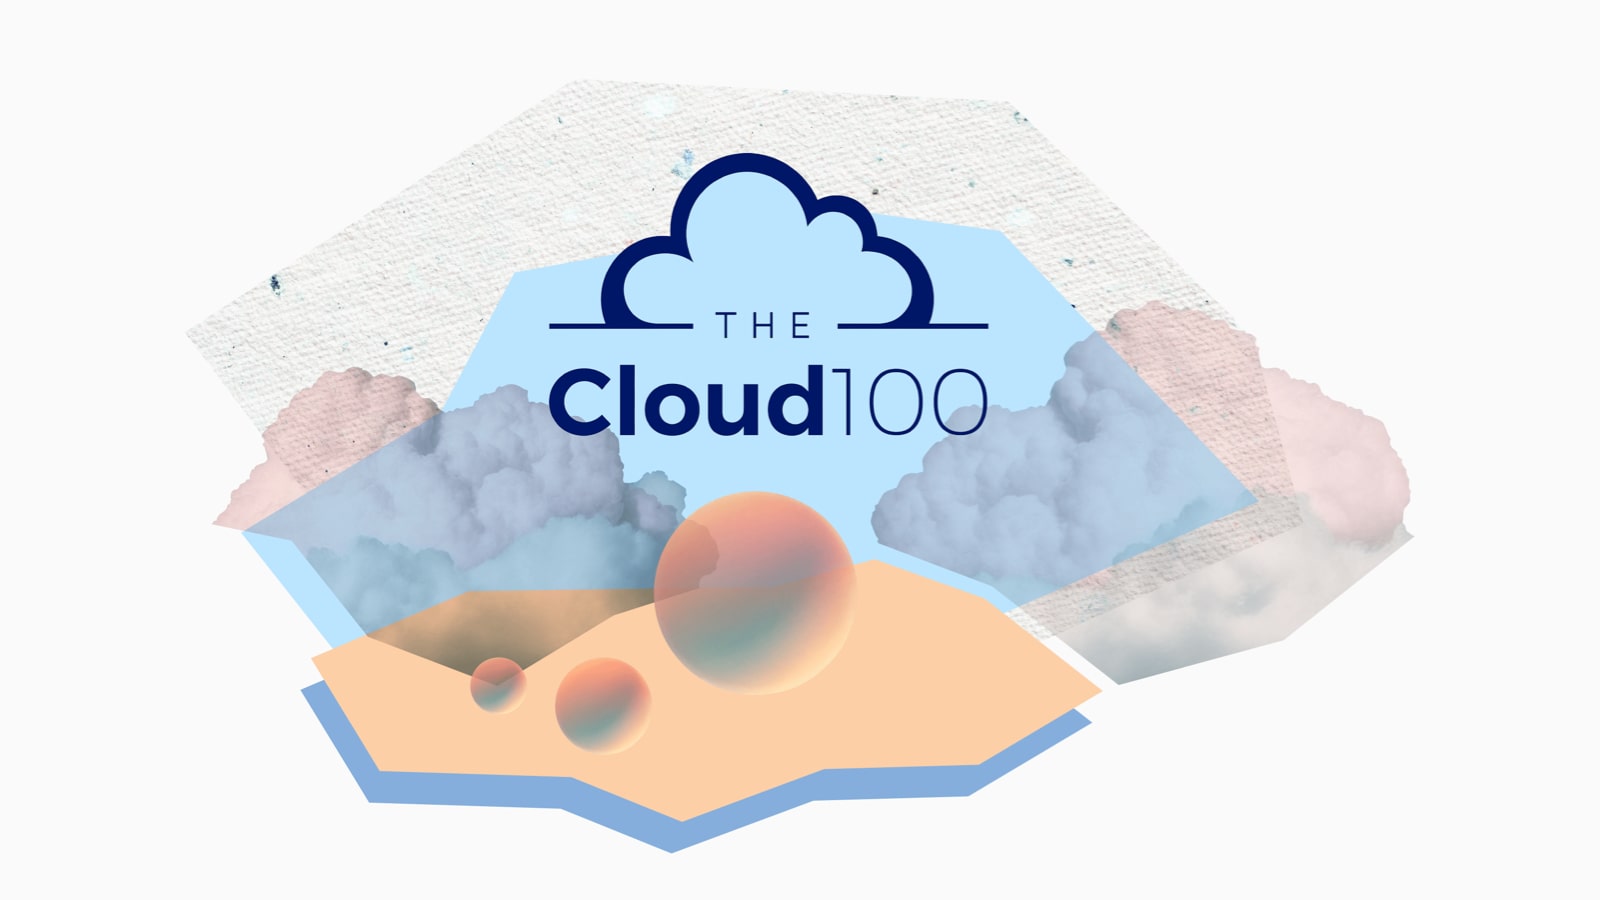 The Cloud 100 Logo on top of a graphic of shapes and clouds